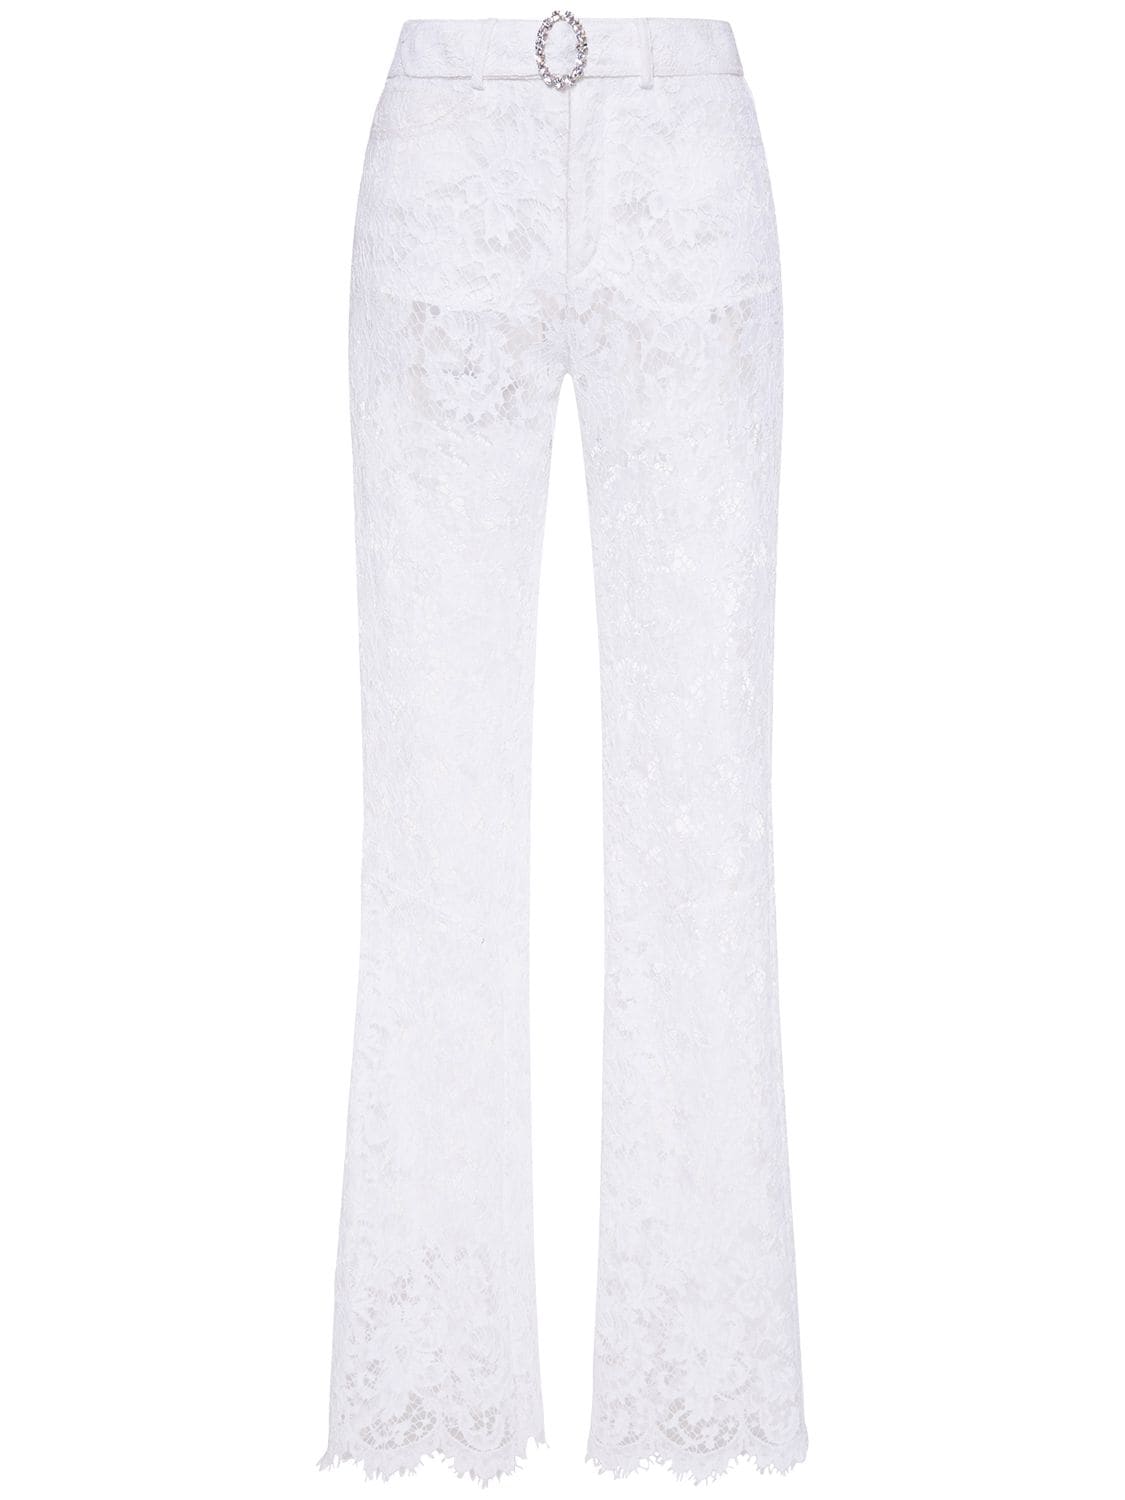 ALESSANDRA RICH LACE FLARED PANTS W/ CRYSTAL BUCKLE